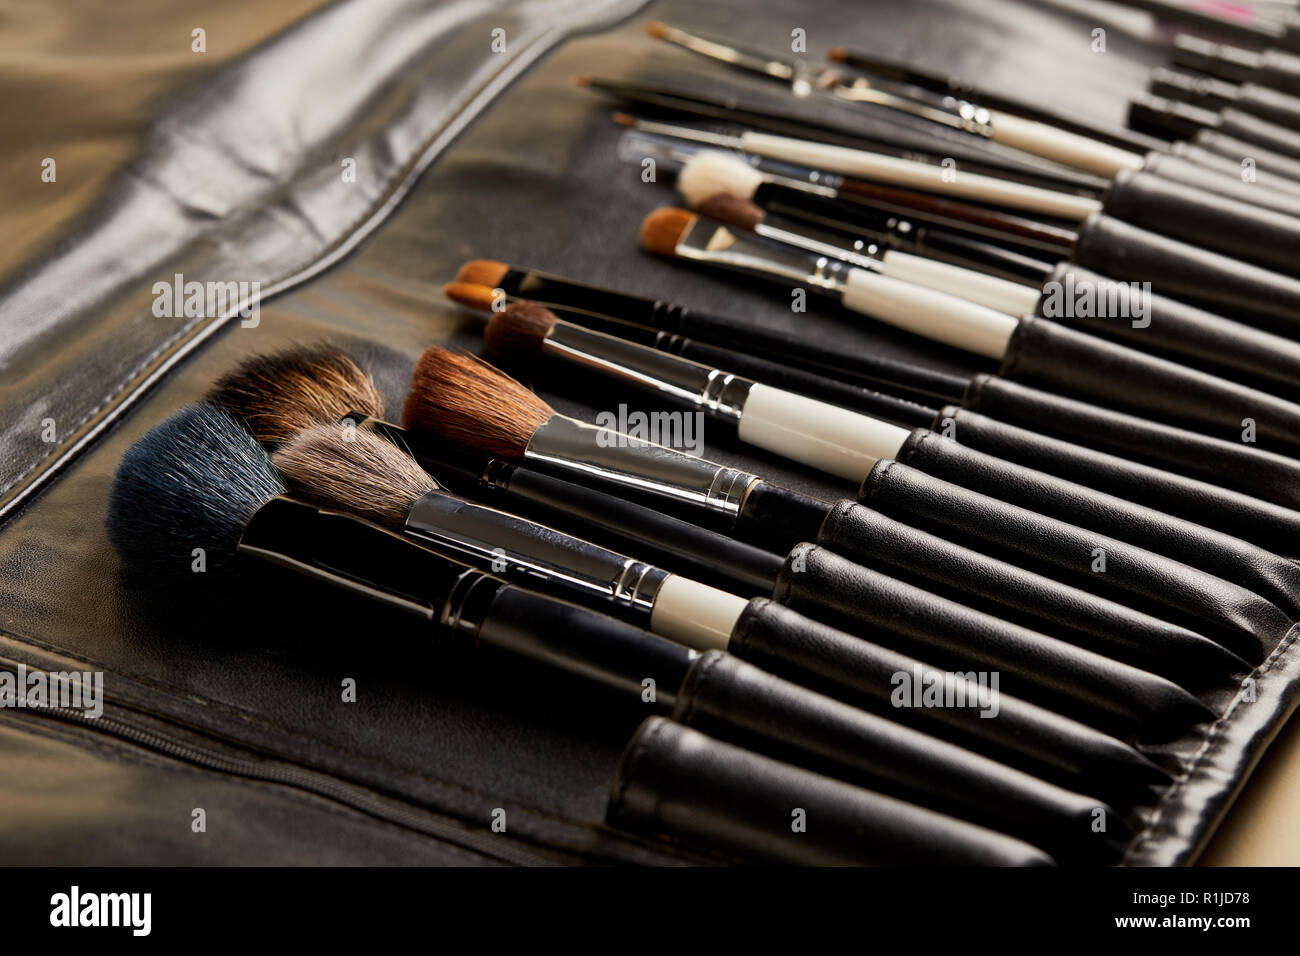 close-up shot of leather holder with professional makeup brushes Stock Photo